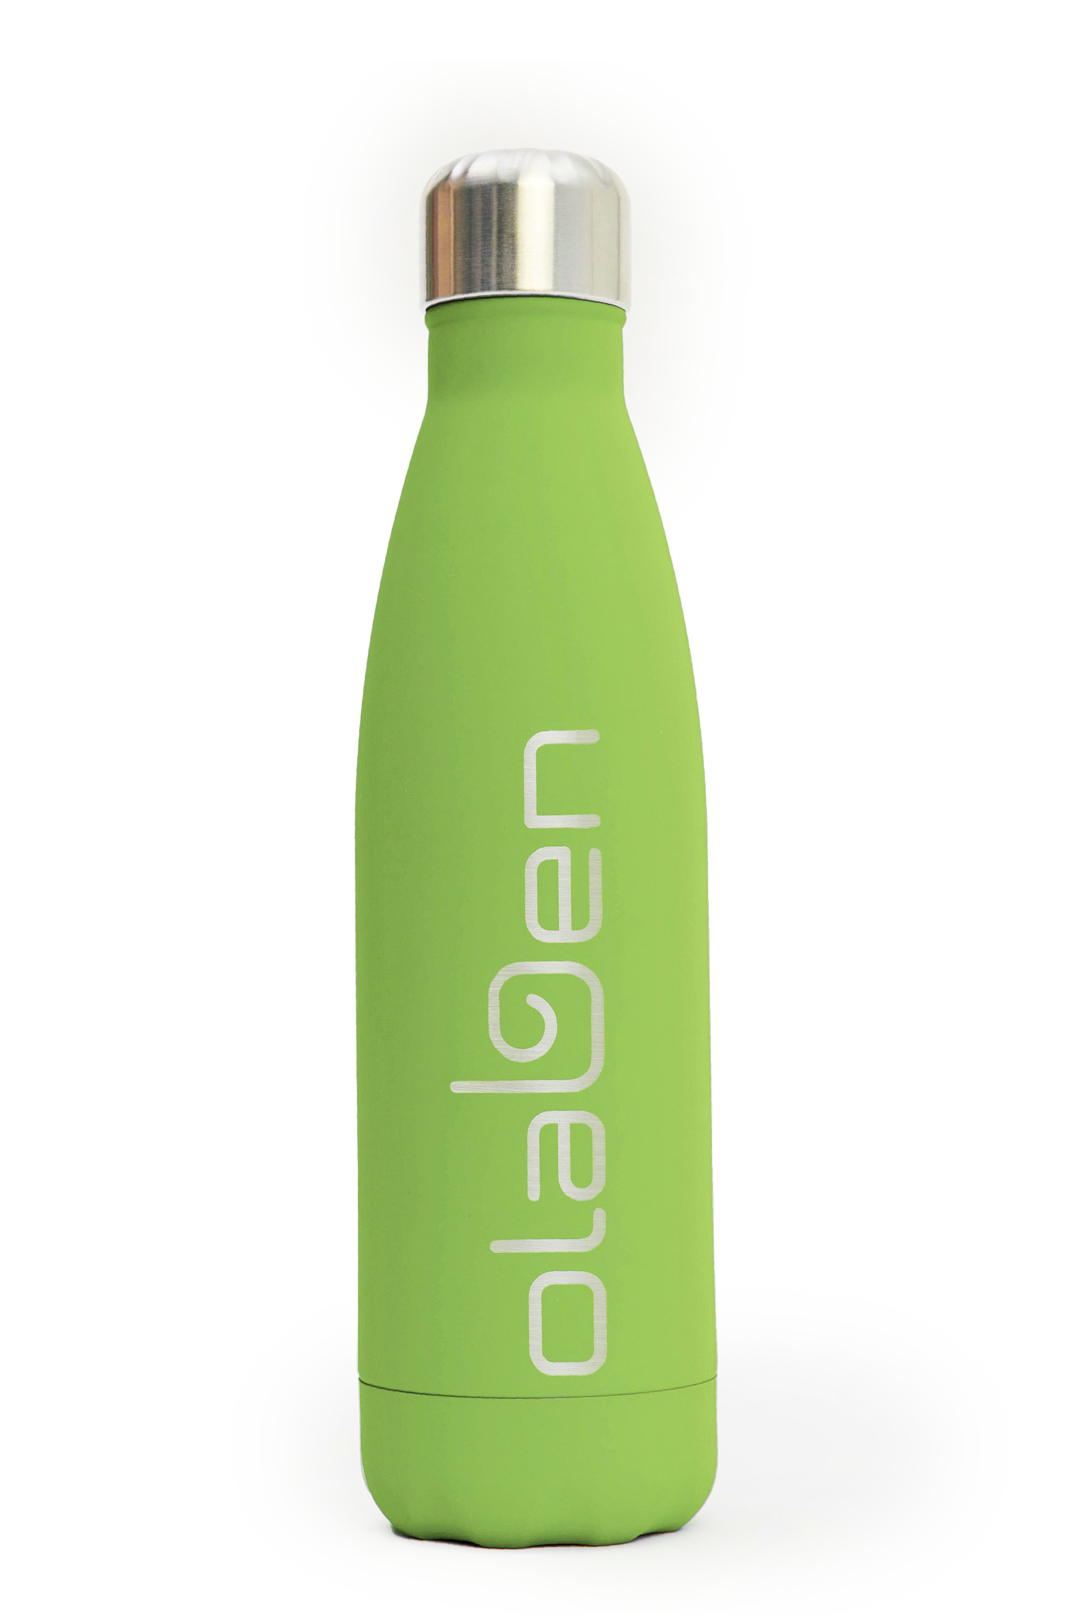 green water bottle equipment for outdoor use